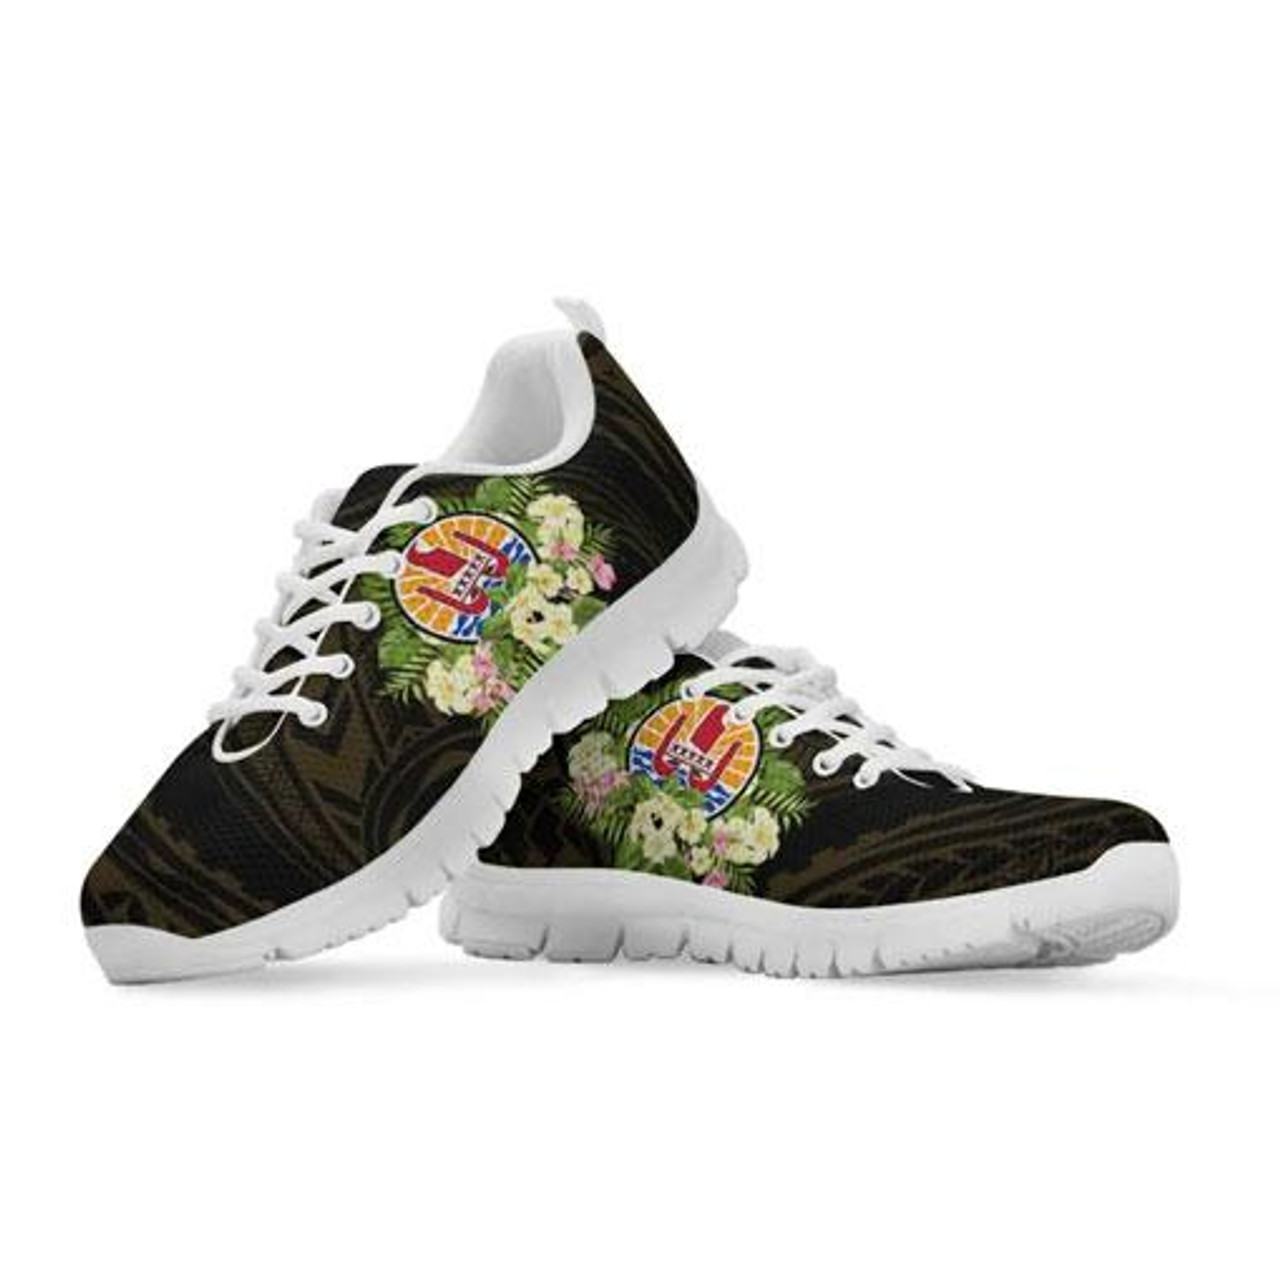 Tahiti Sneakers - Polynesian Gold Patterns Collection 5